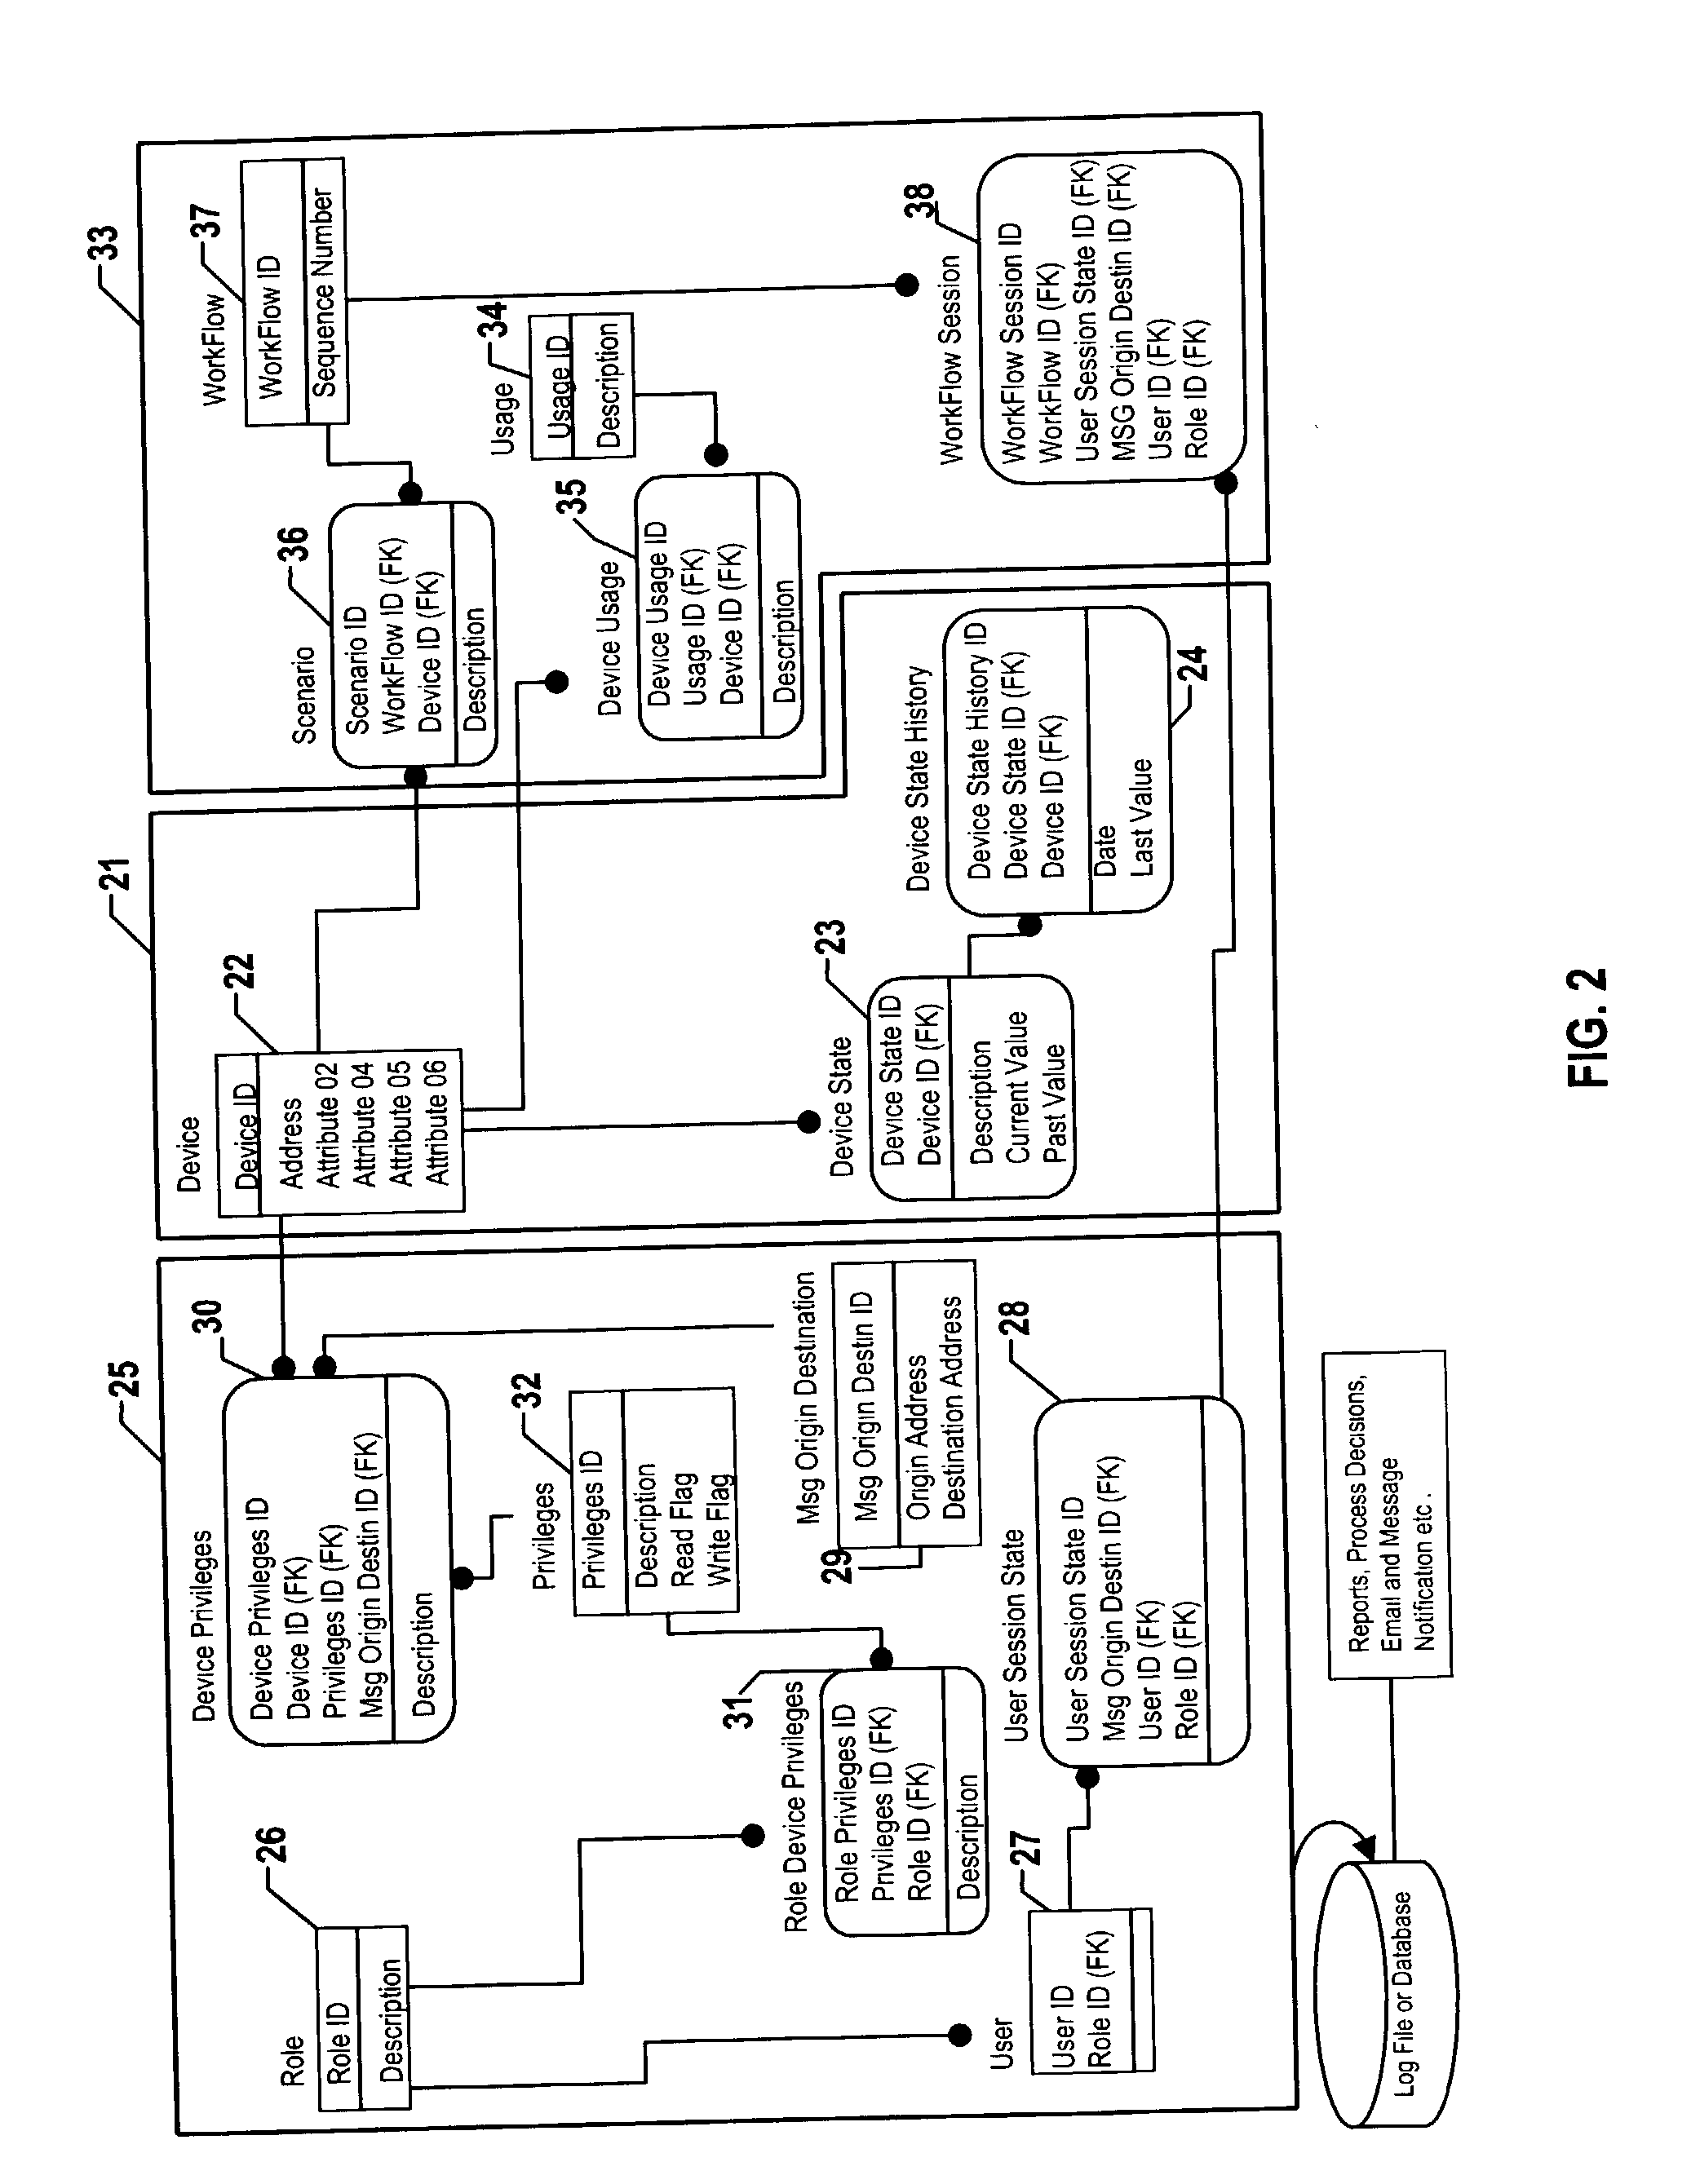 Method for analyzing and characterizing the usage pattern of a device